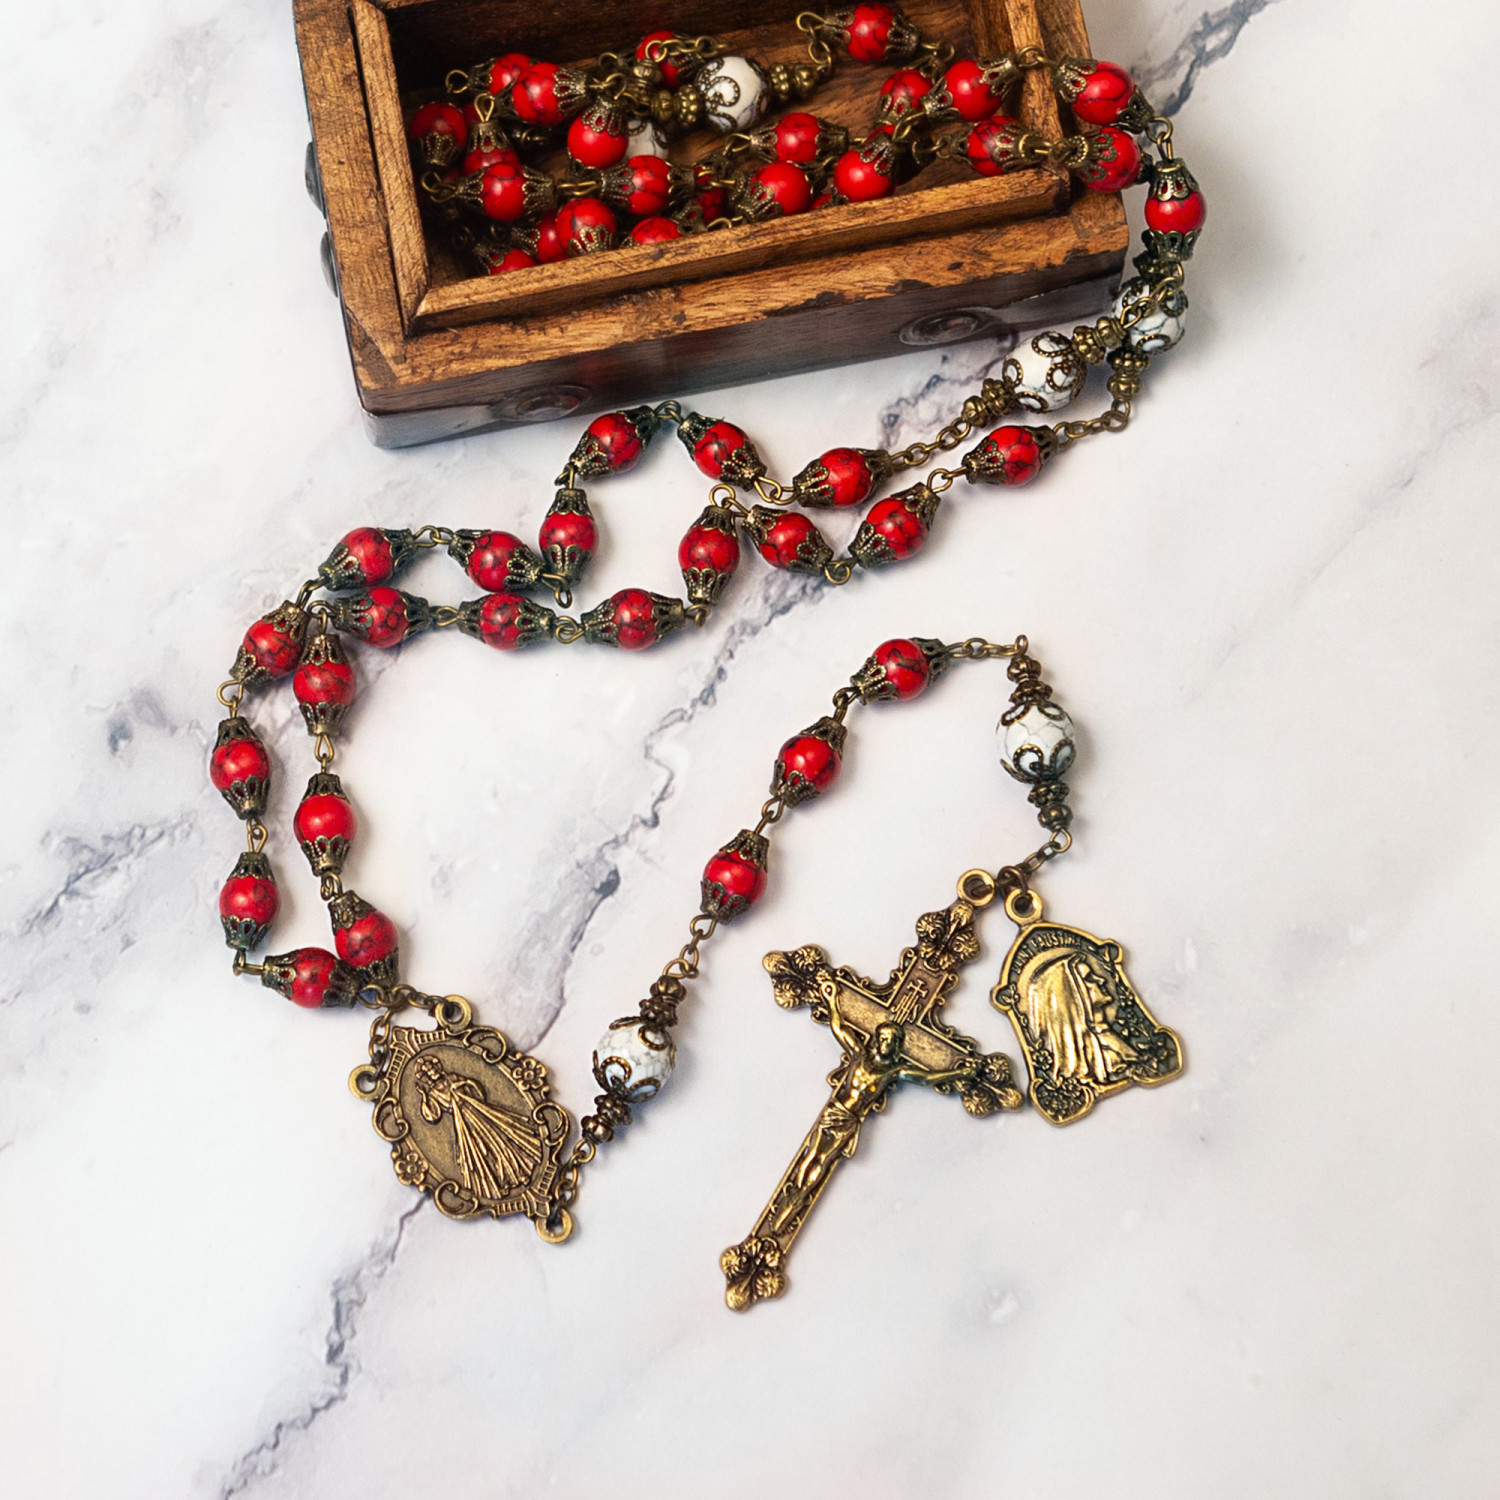 Look to Him and be Radiant: Divine Mercy Melty Beads